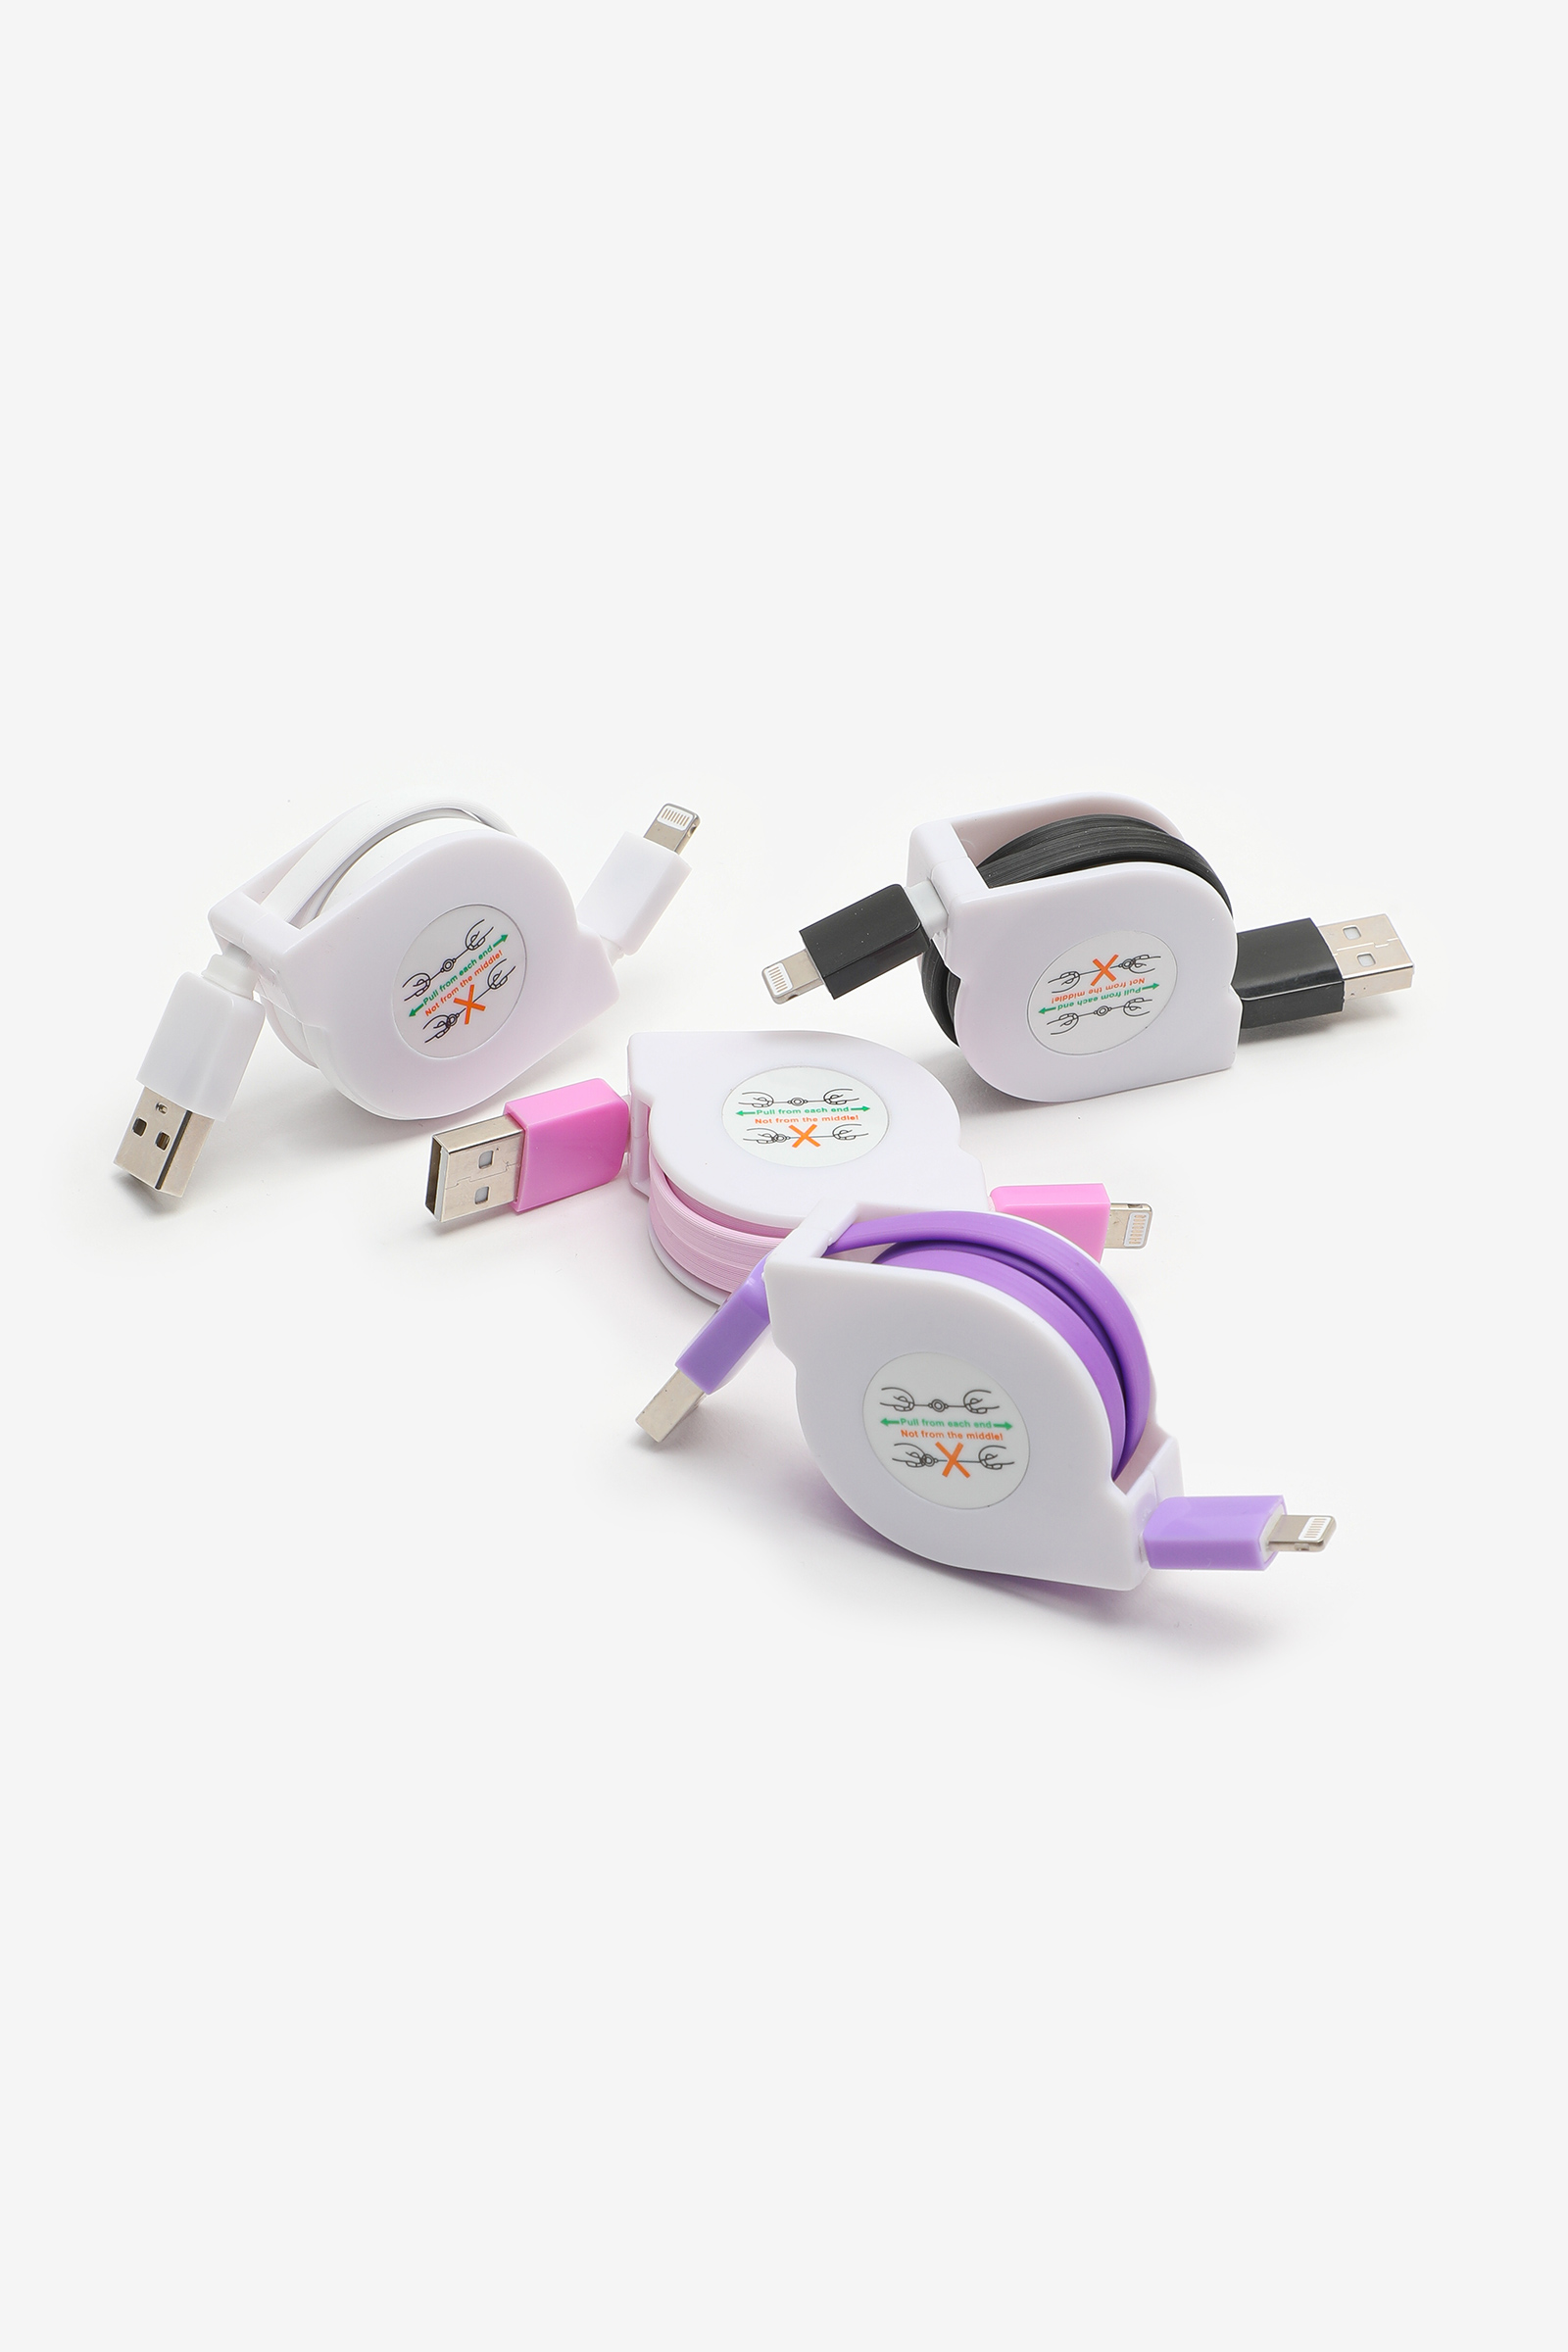 Retractable 36" USB Cable